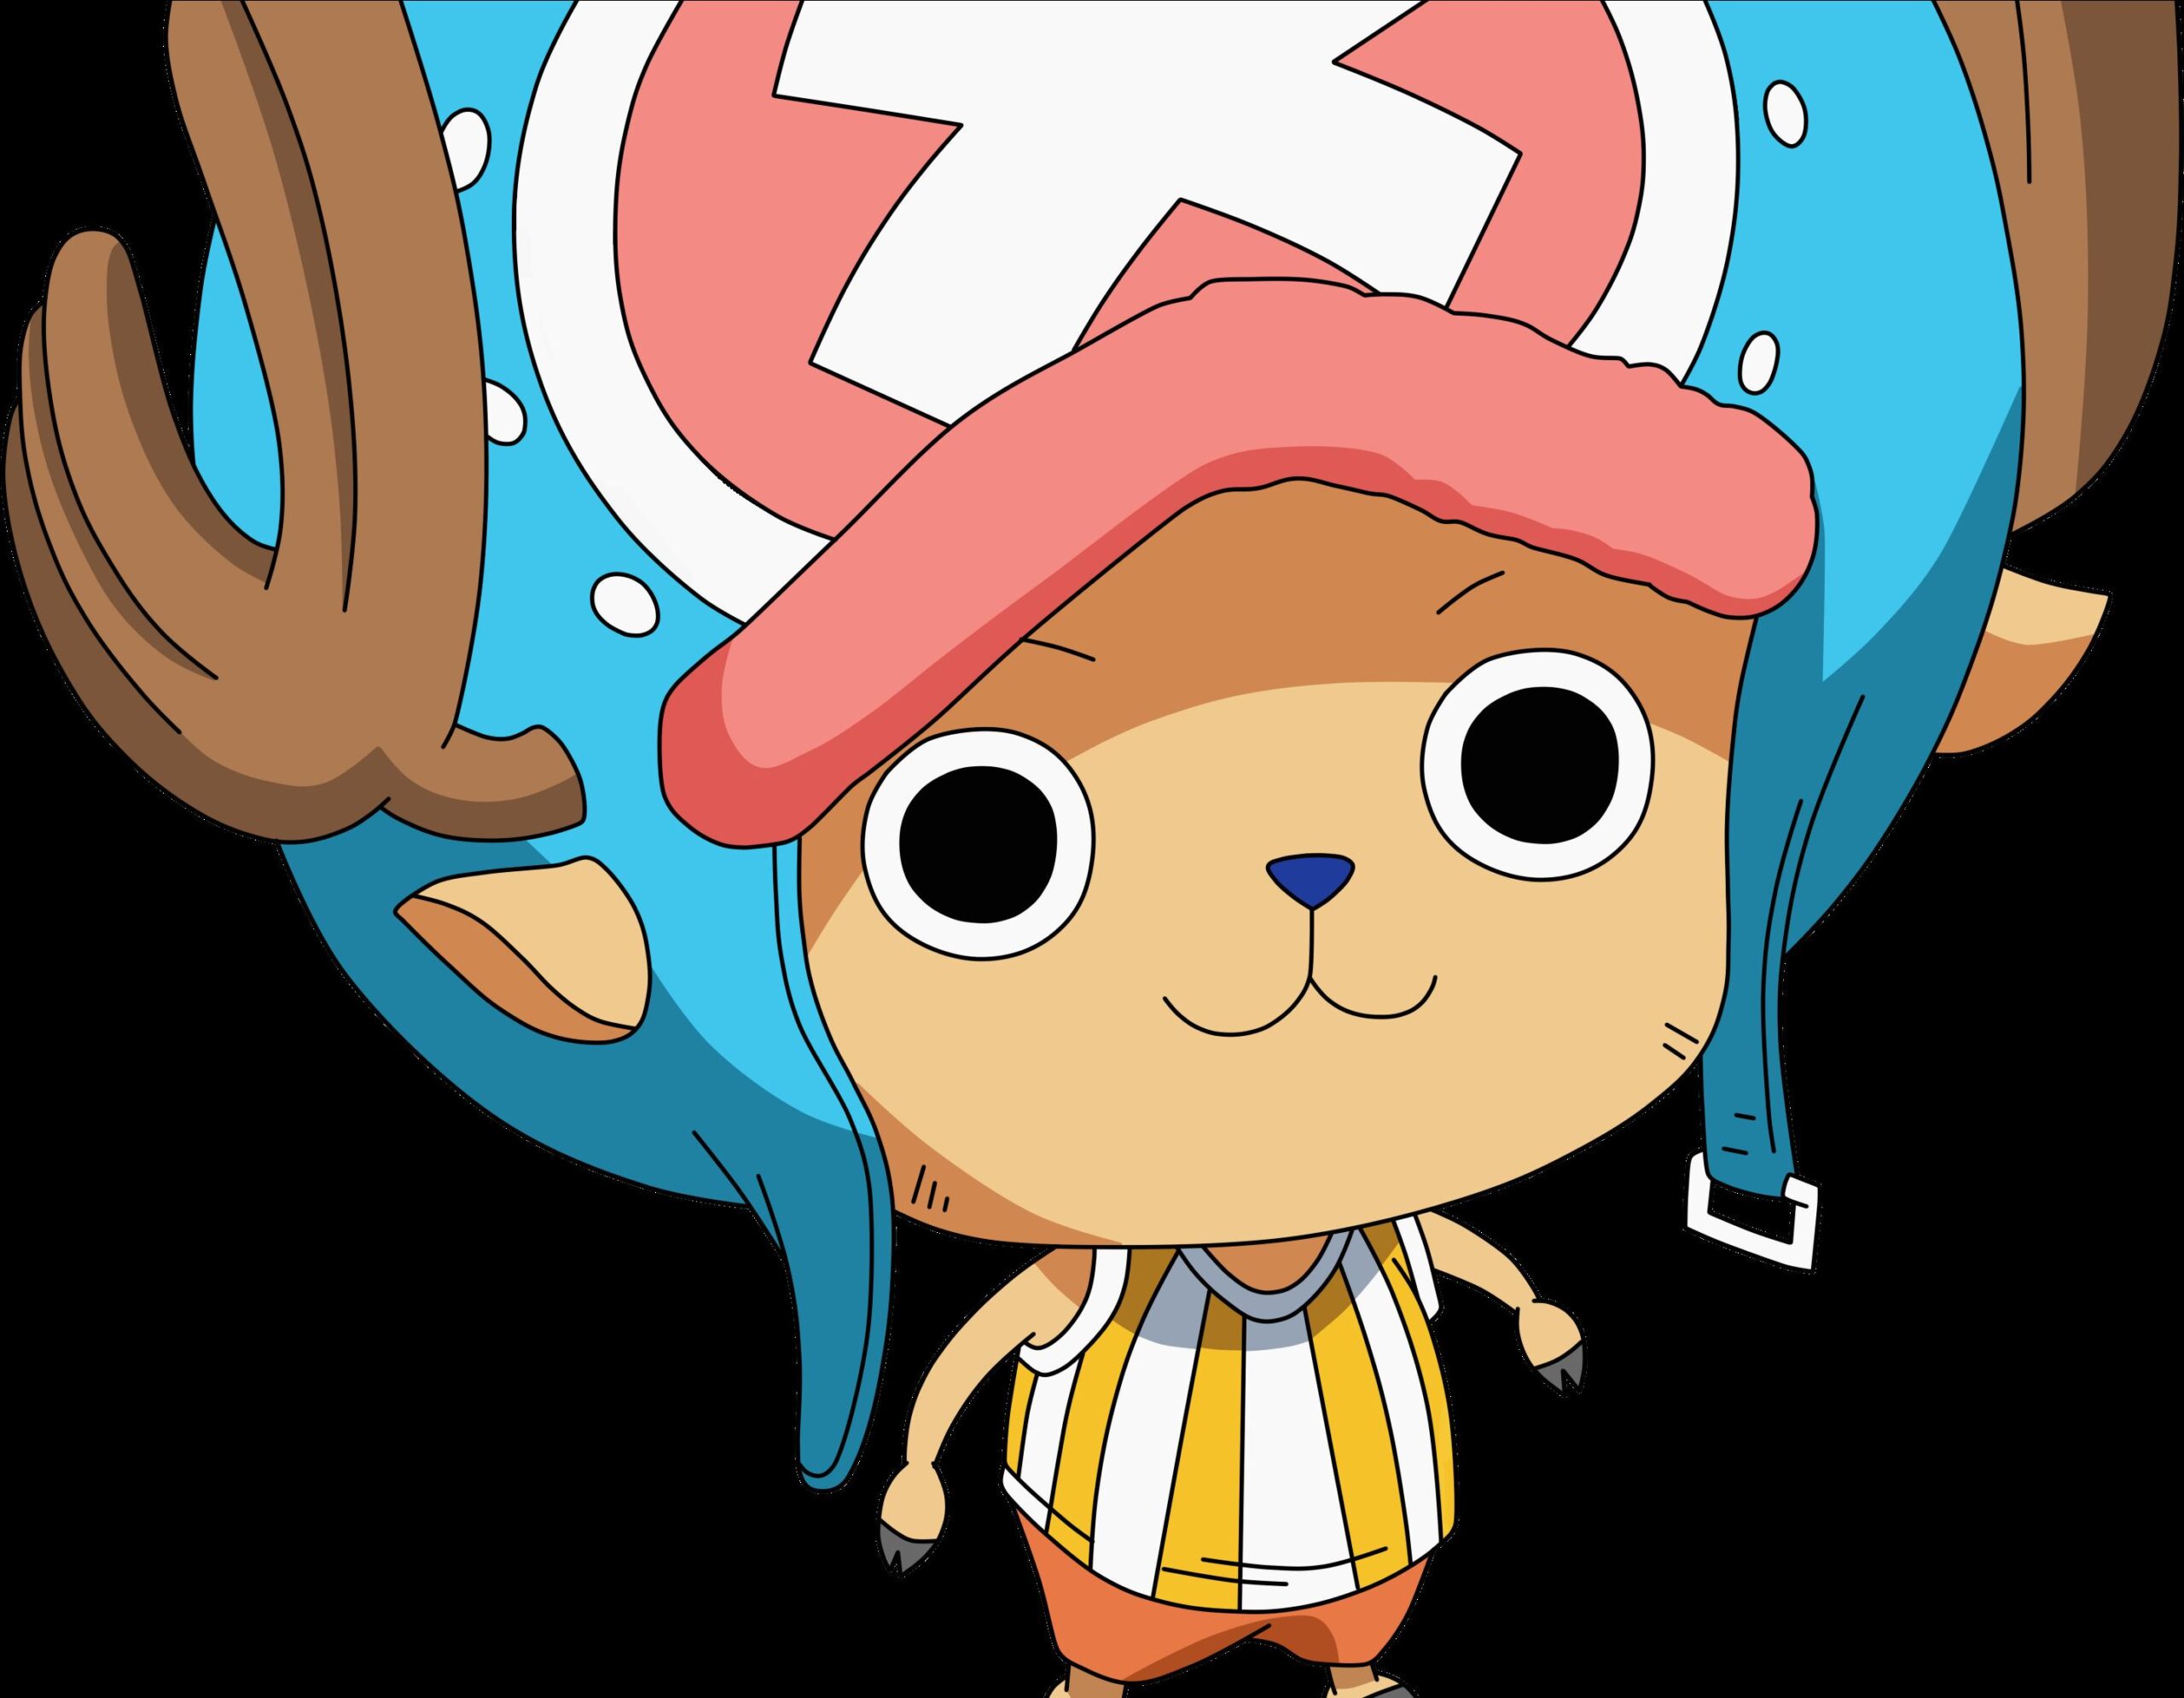 Chopper Hd Wallpapers Free Download, One Piece, Anime